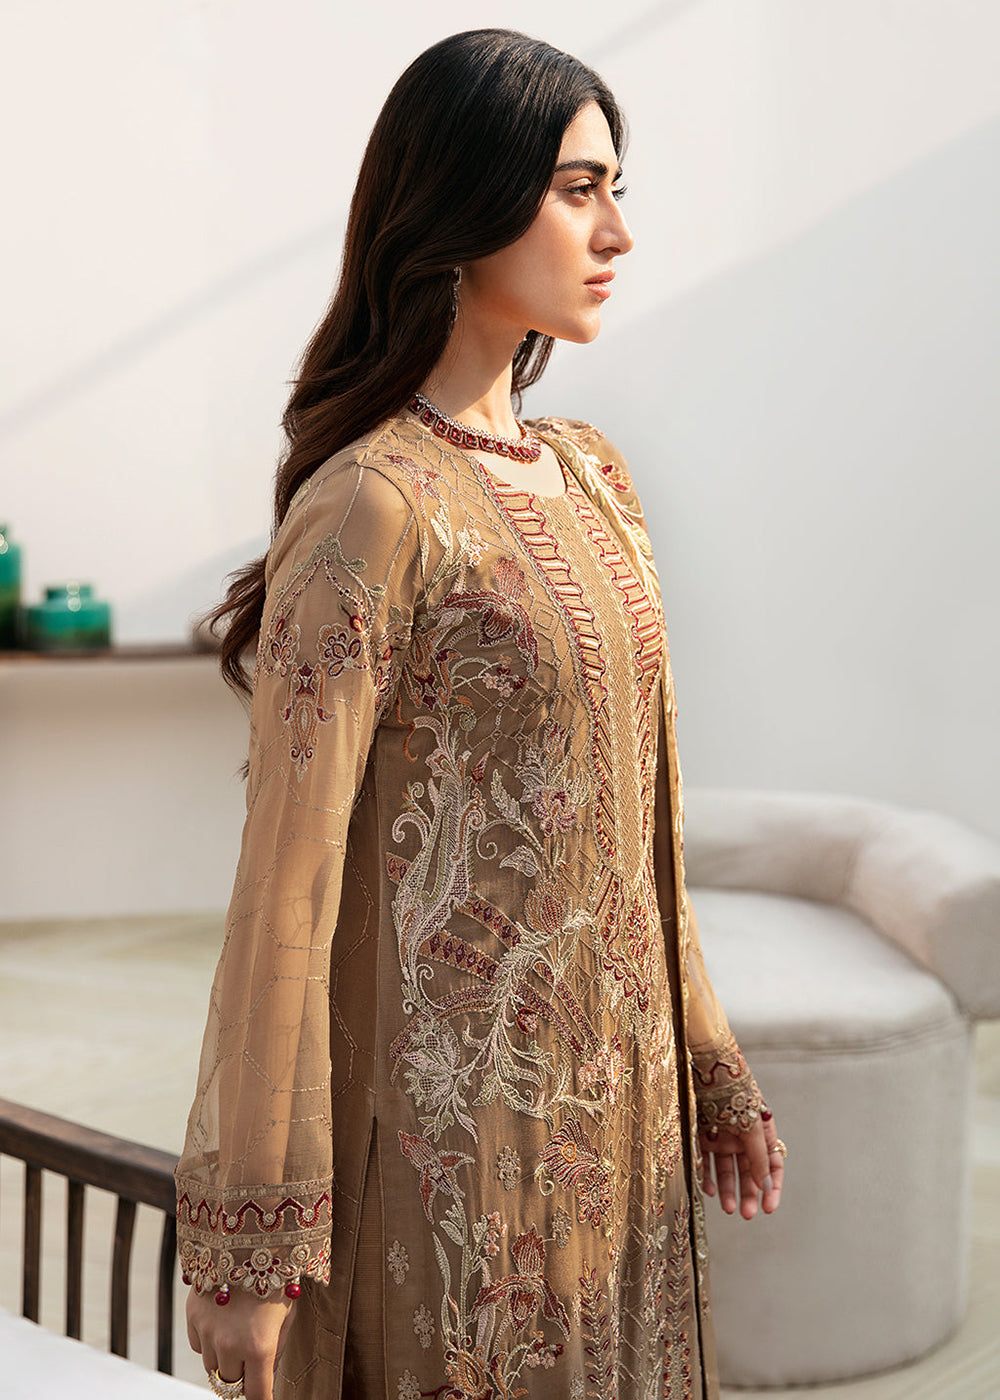 Buy Now Chevron Chiffon Collection Volume 8 by Ramsha | A-812 Online at Empress in USA, UK, Canada & Worldwide at Empress Clothing.